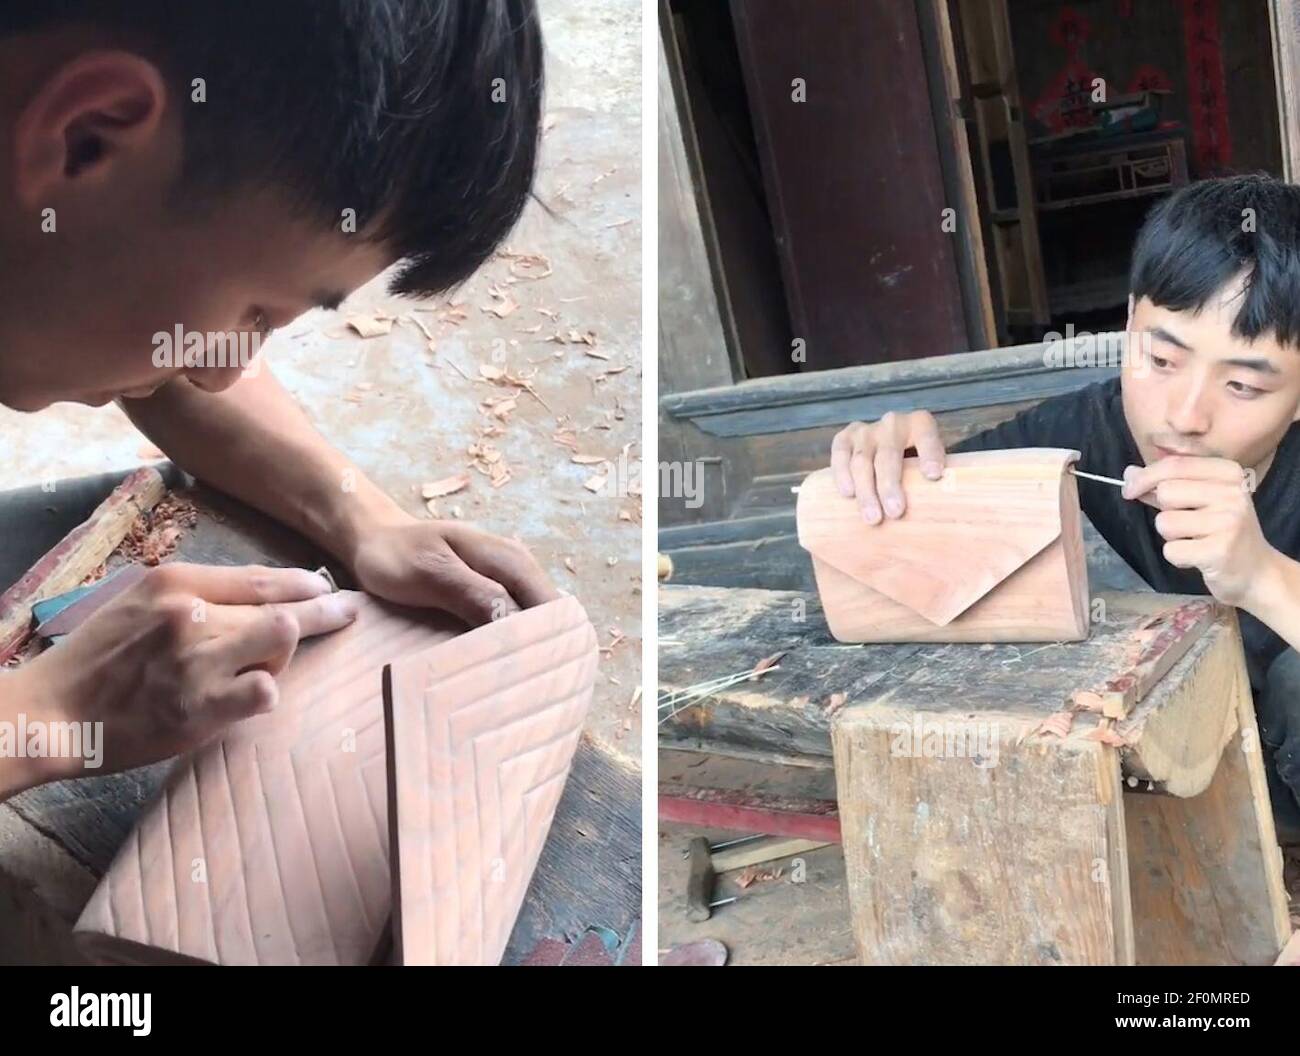 In this undated and composite photo, 24-year-old Chinese man An Xu makes a wooden handbag of Yves Saint Laurent (YSL) for his girlfriend at home in Zunyi city, southwest China's Guizhou province. 24-year-old Chinese man An Xu from Zunyi city, southwest China's Guizhou province, was fond of handicraft work when he was young. He had one million fans after making live broadcast of creating tools from video games. He decided to make a handbag of Yves Saint Laurent (YSL) for his girlfriend. (Photo by Yi fang - Imaginechina/Sipa USA) Stock Photo